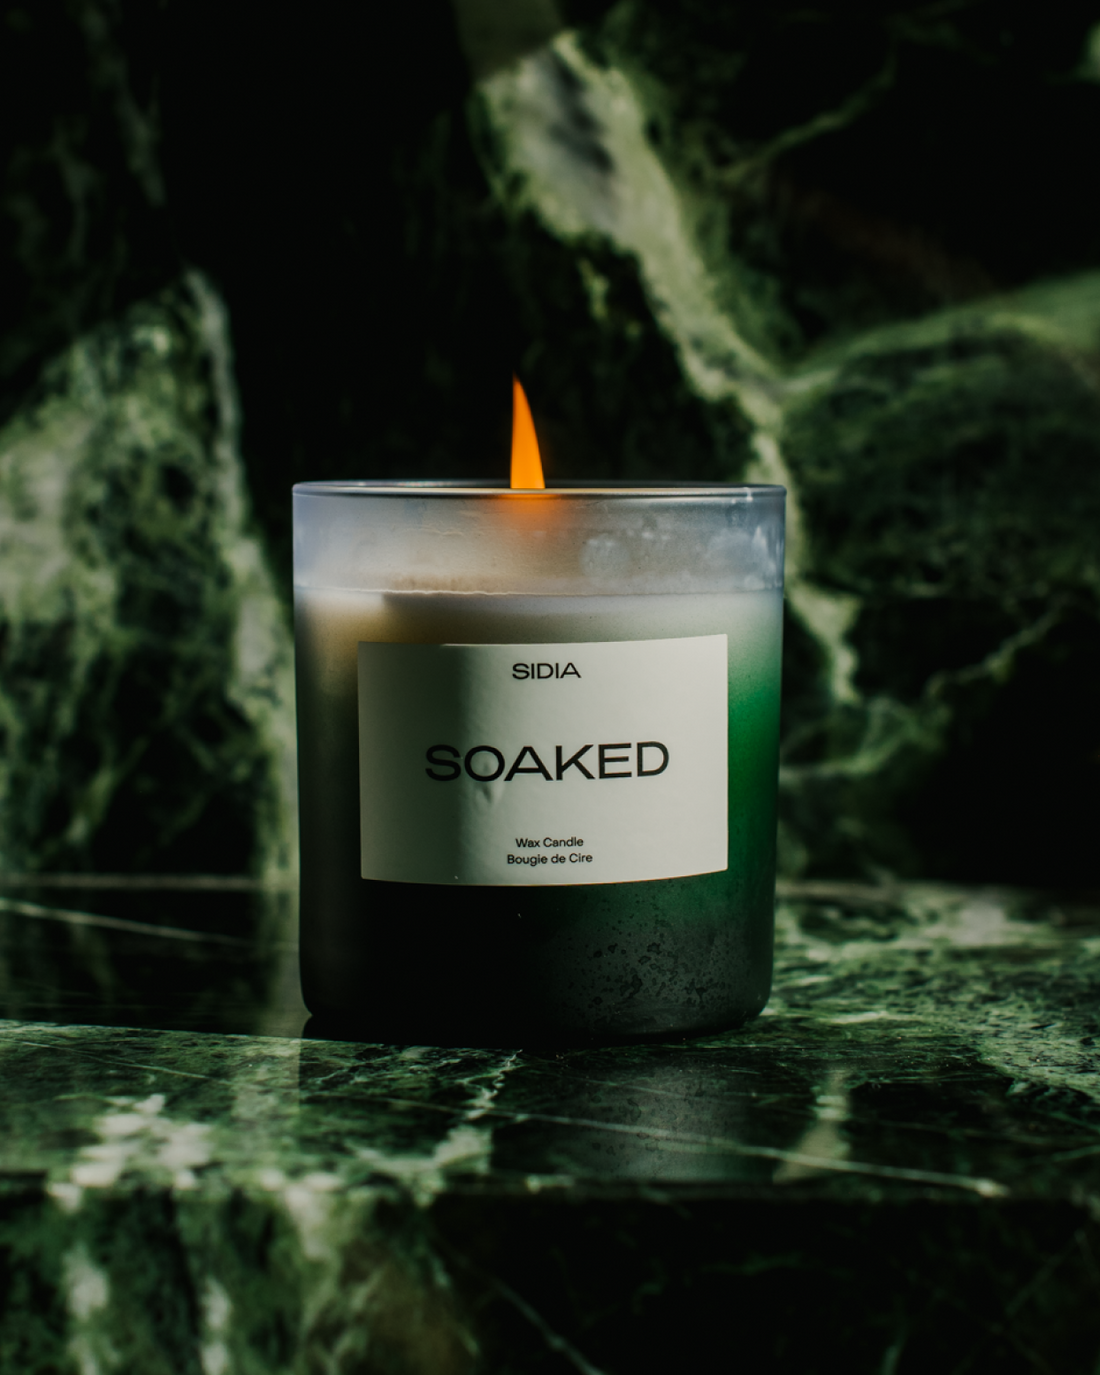 Lit SIDIA Soaked Candle on green countertop - Formula Fig